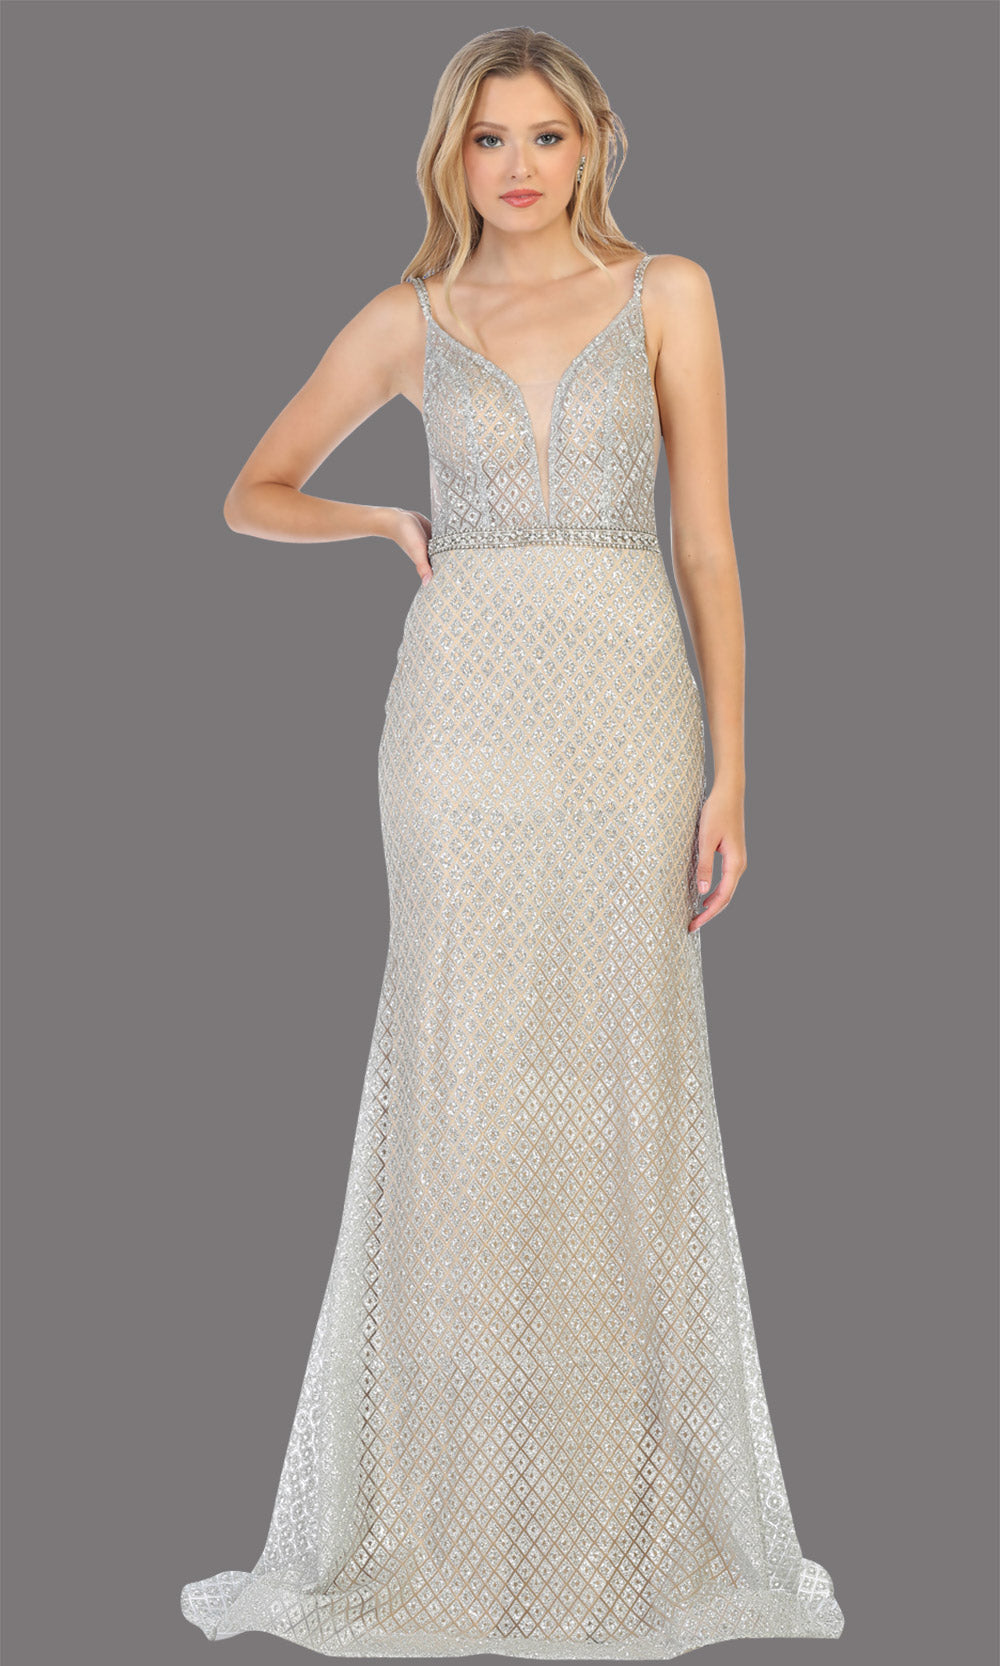 Mayqueen RQ7782 long silver v neck evening fitted sequin dress w/straps. Full length light grey gown is perfect for  enagagement/e-shoot dress, formal wedding guest, indowestern gown, evening party dress, prom, bridesmaid. Plus sizes avail.jpg